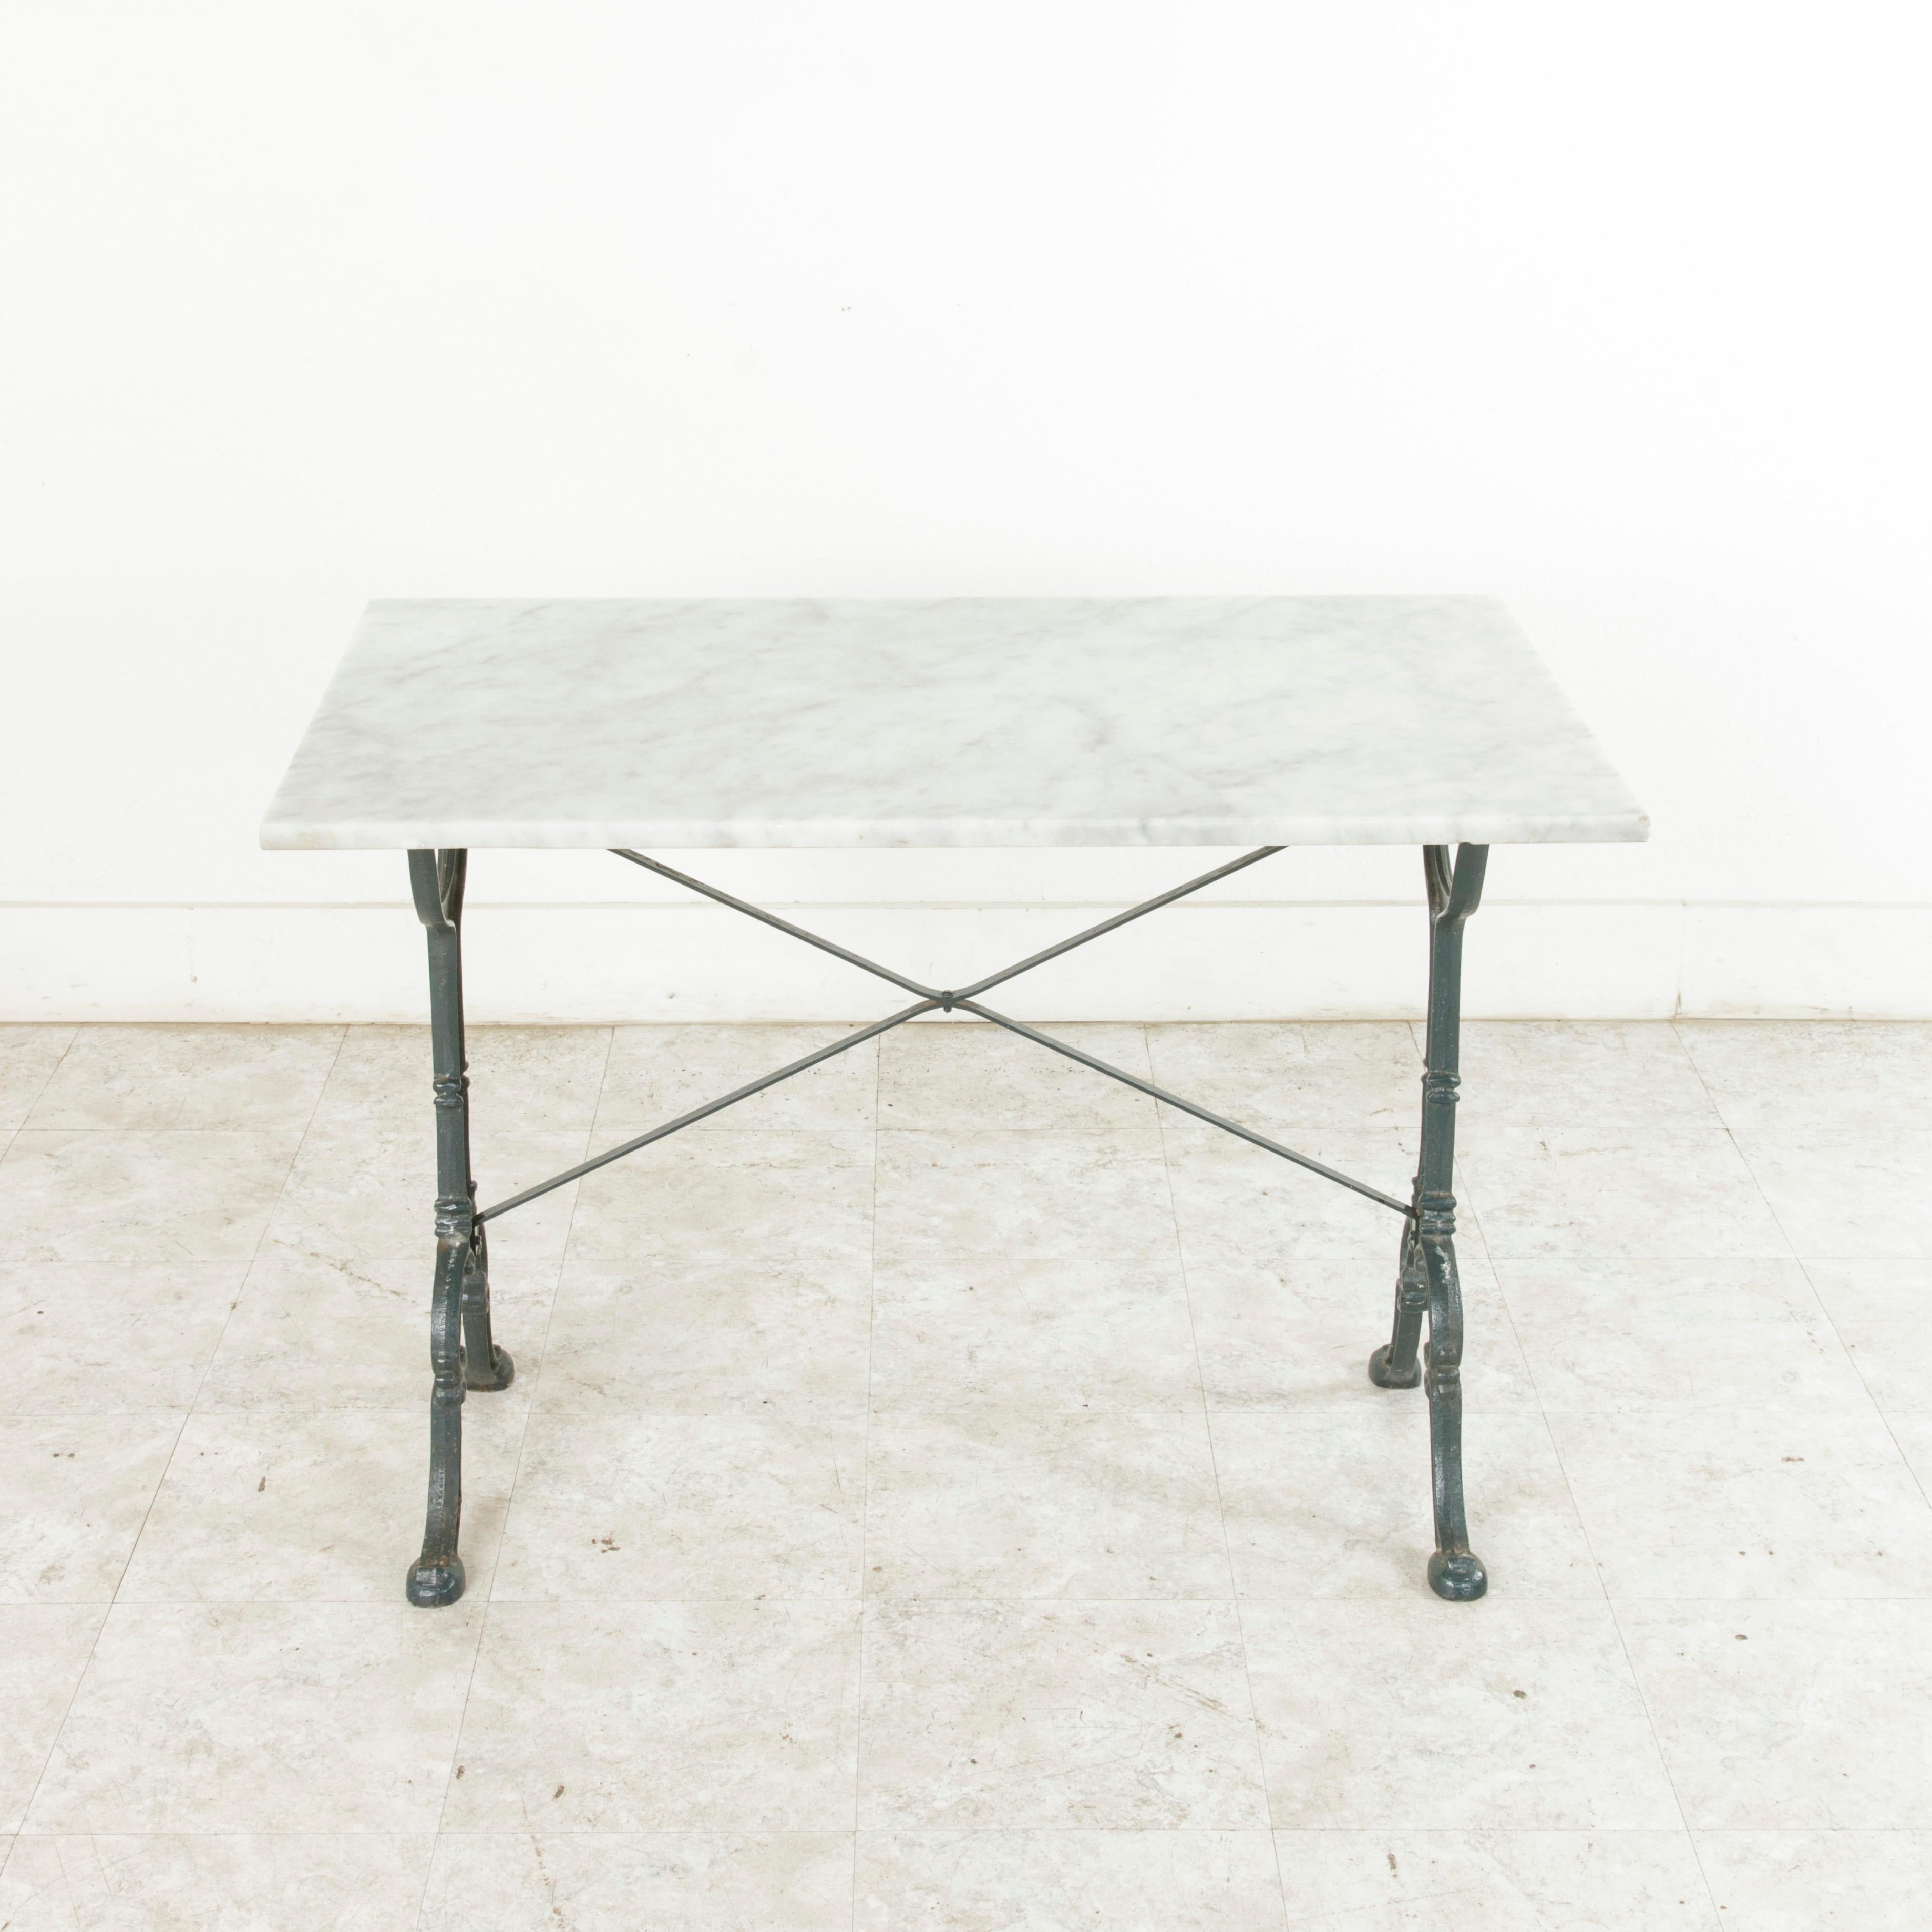 This early 20th century cast iron bistro table features its original solid marble top. A riveted stretcher provides additional stability. The base is marked by the maker Godin, a French company also well-known for its cast iron stoves. Ideal as a